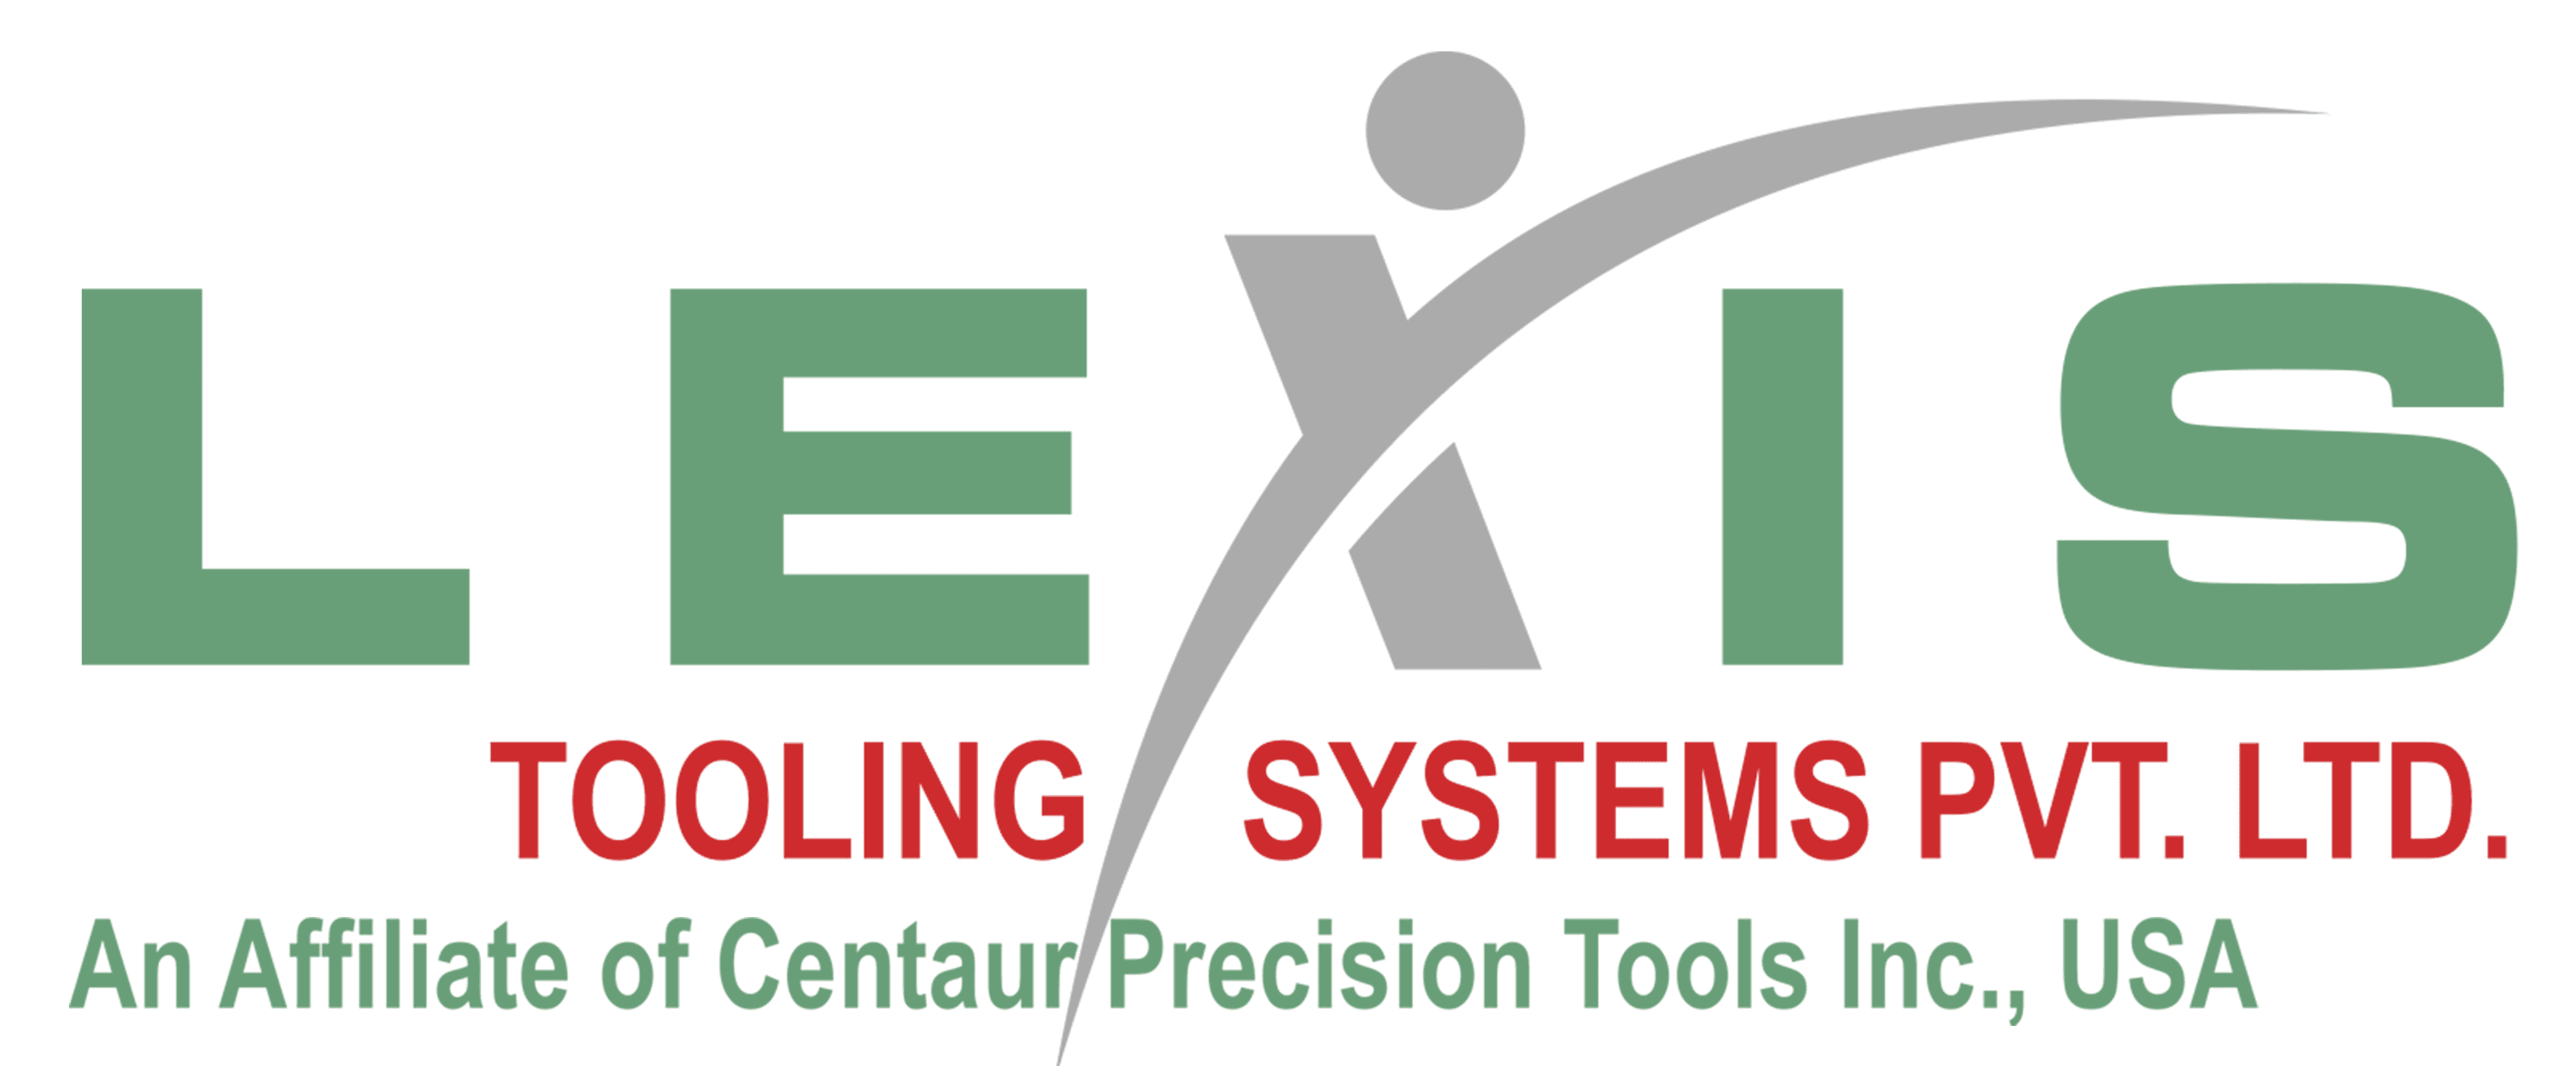 Lexis Tooling Systems Pvt. Ltd.